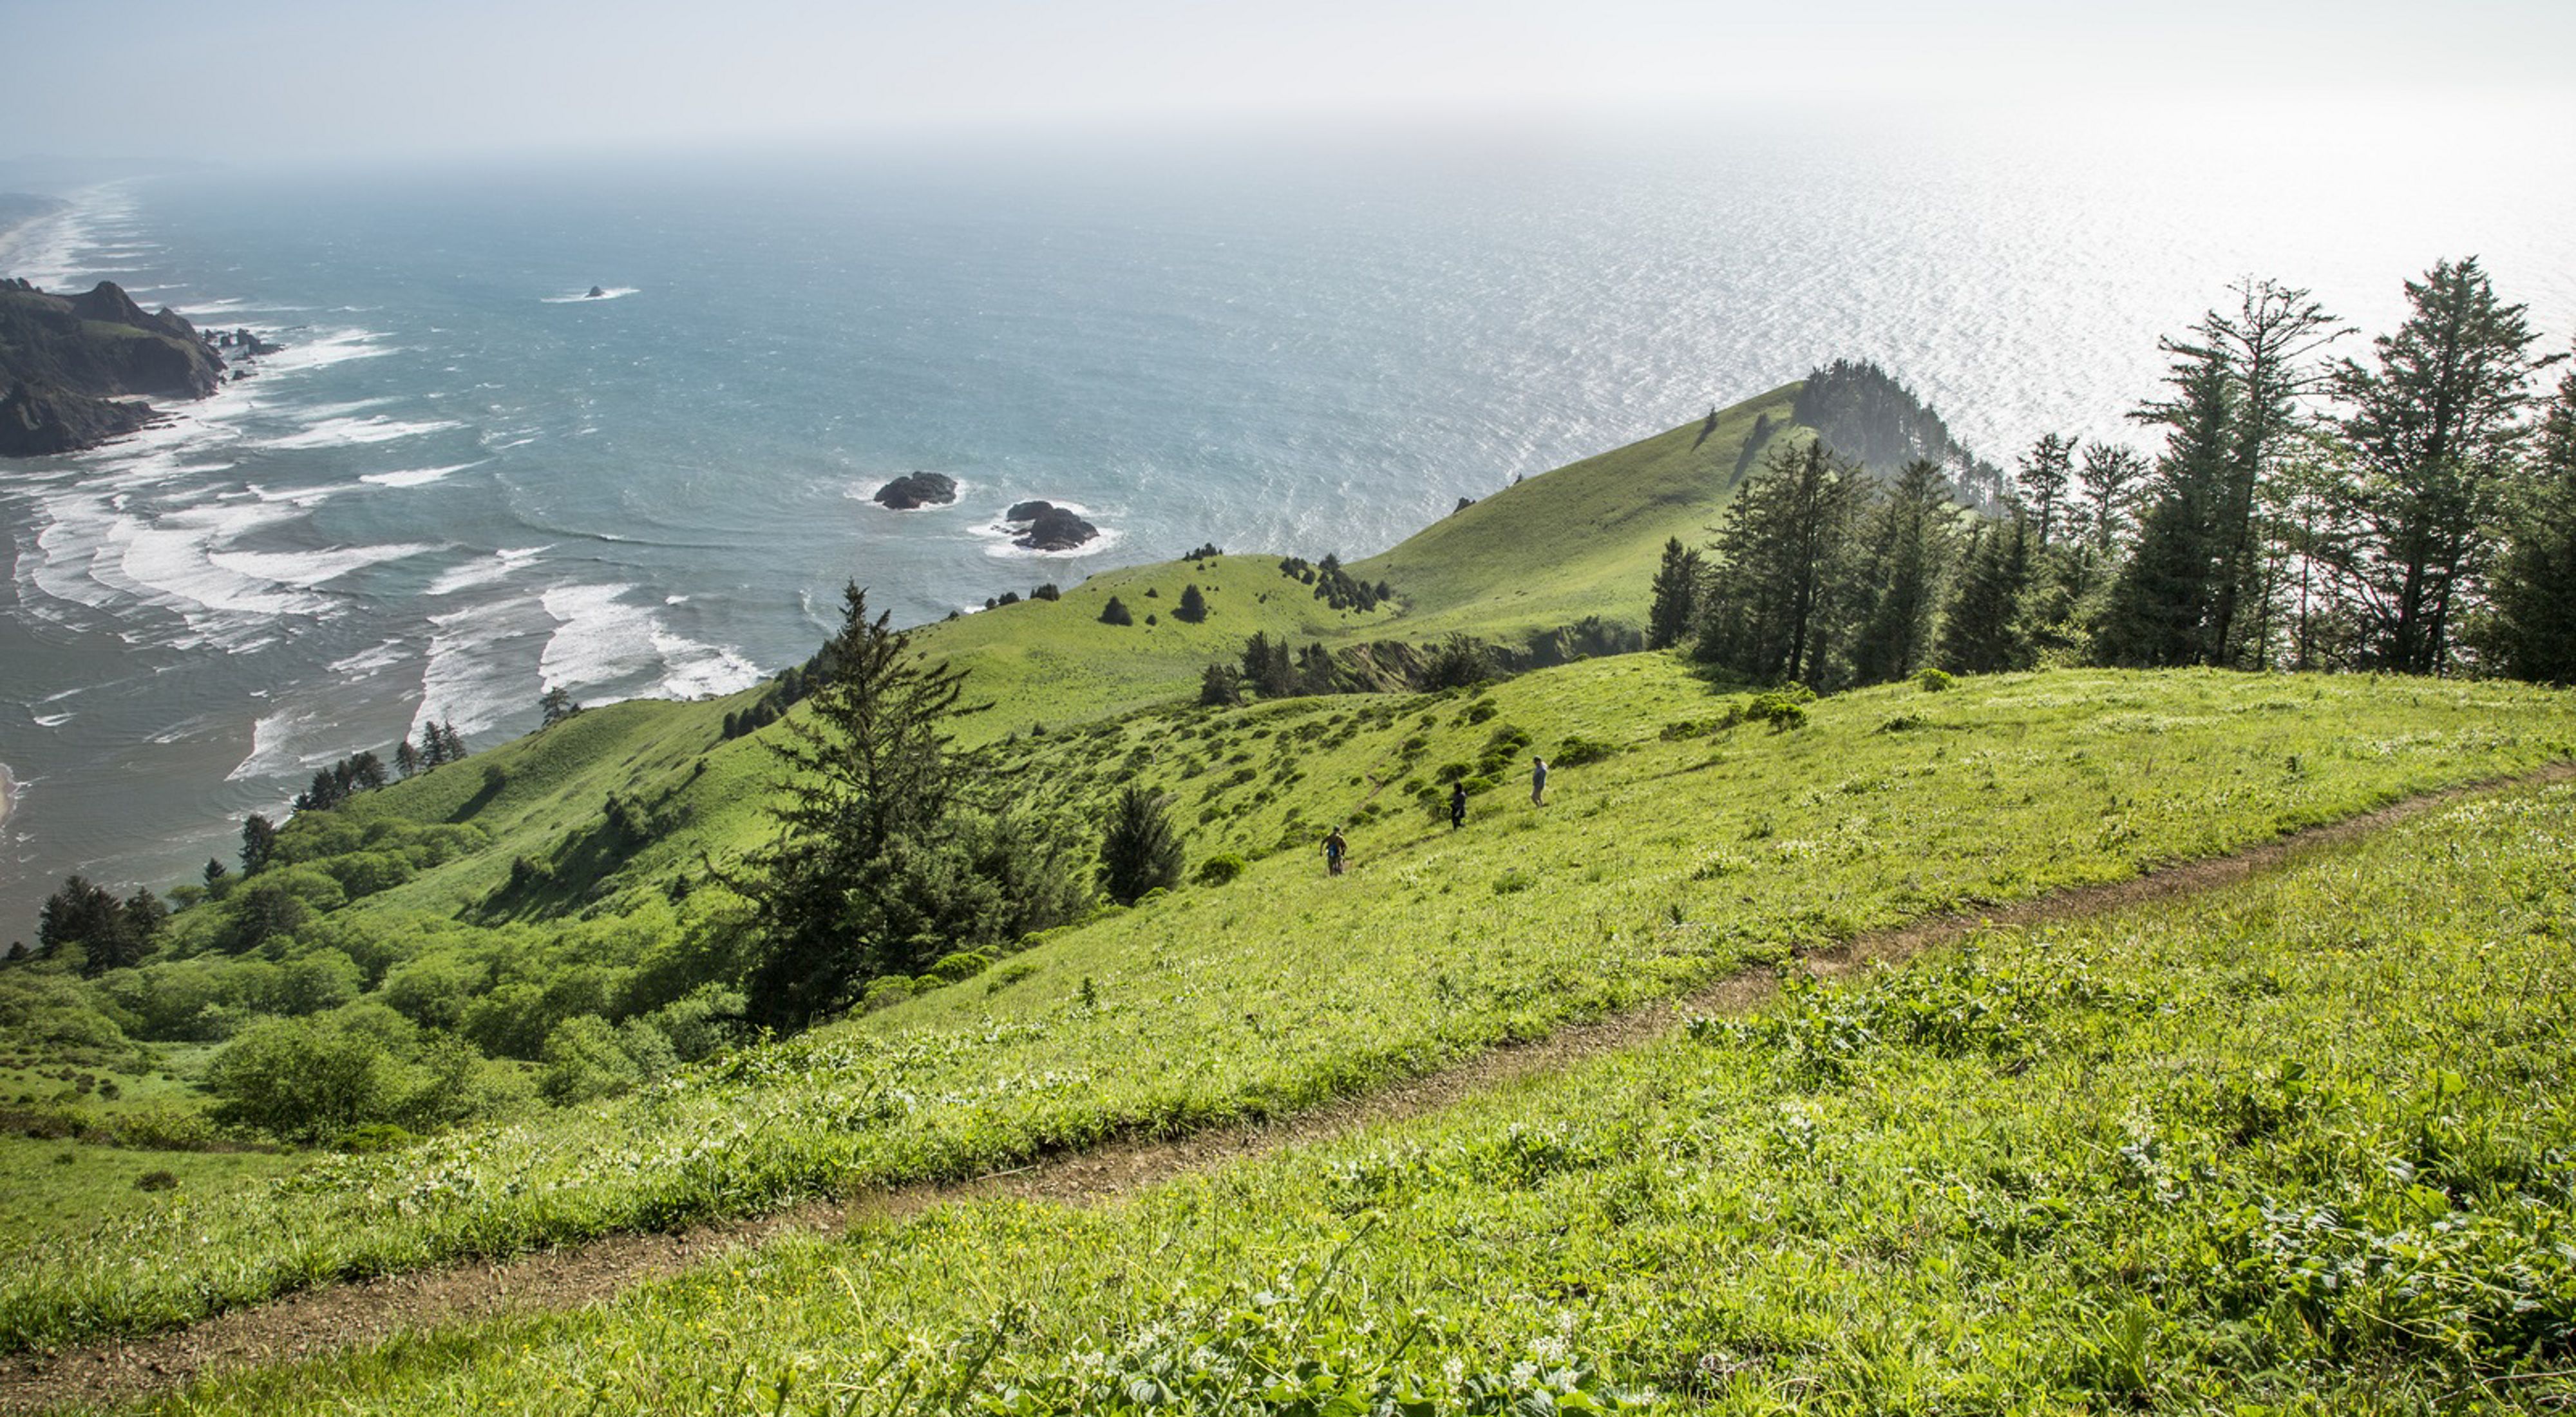 View down a steep slope from a headland covered in green grass, overlooking a beach and the ocean.